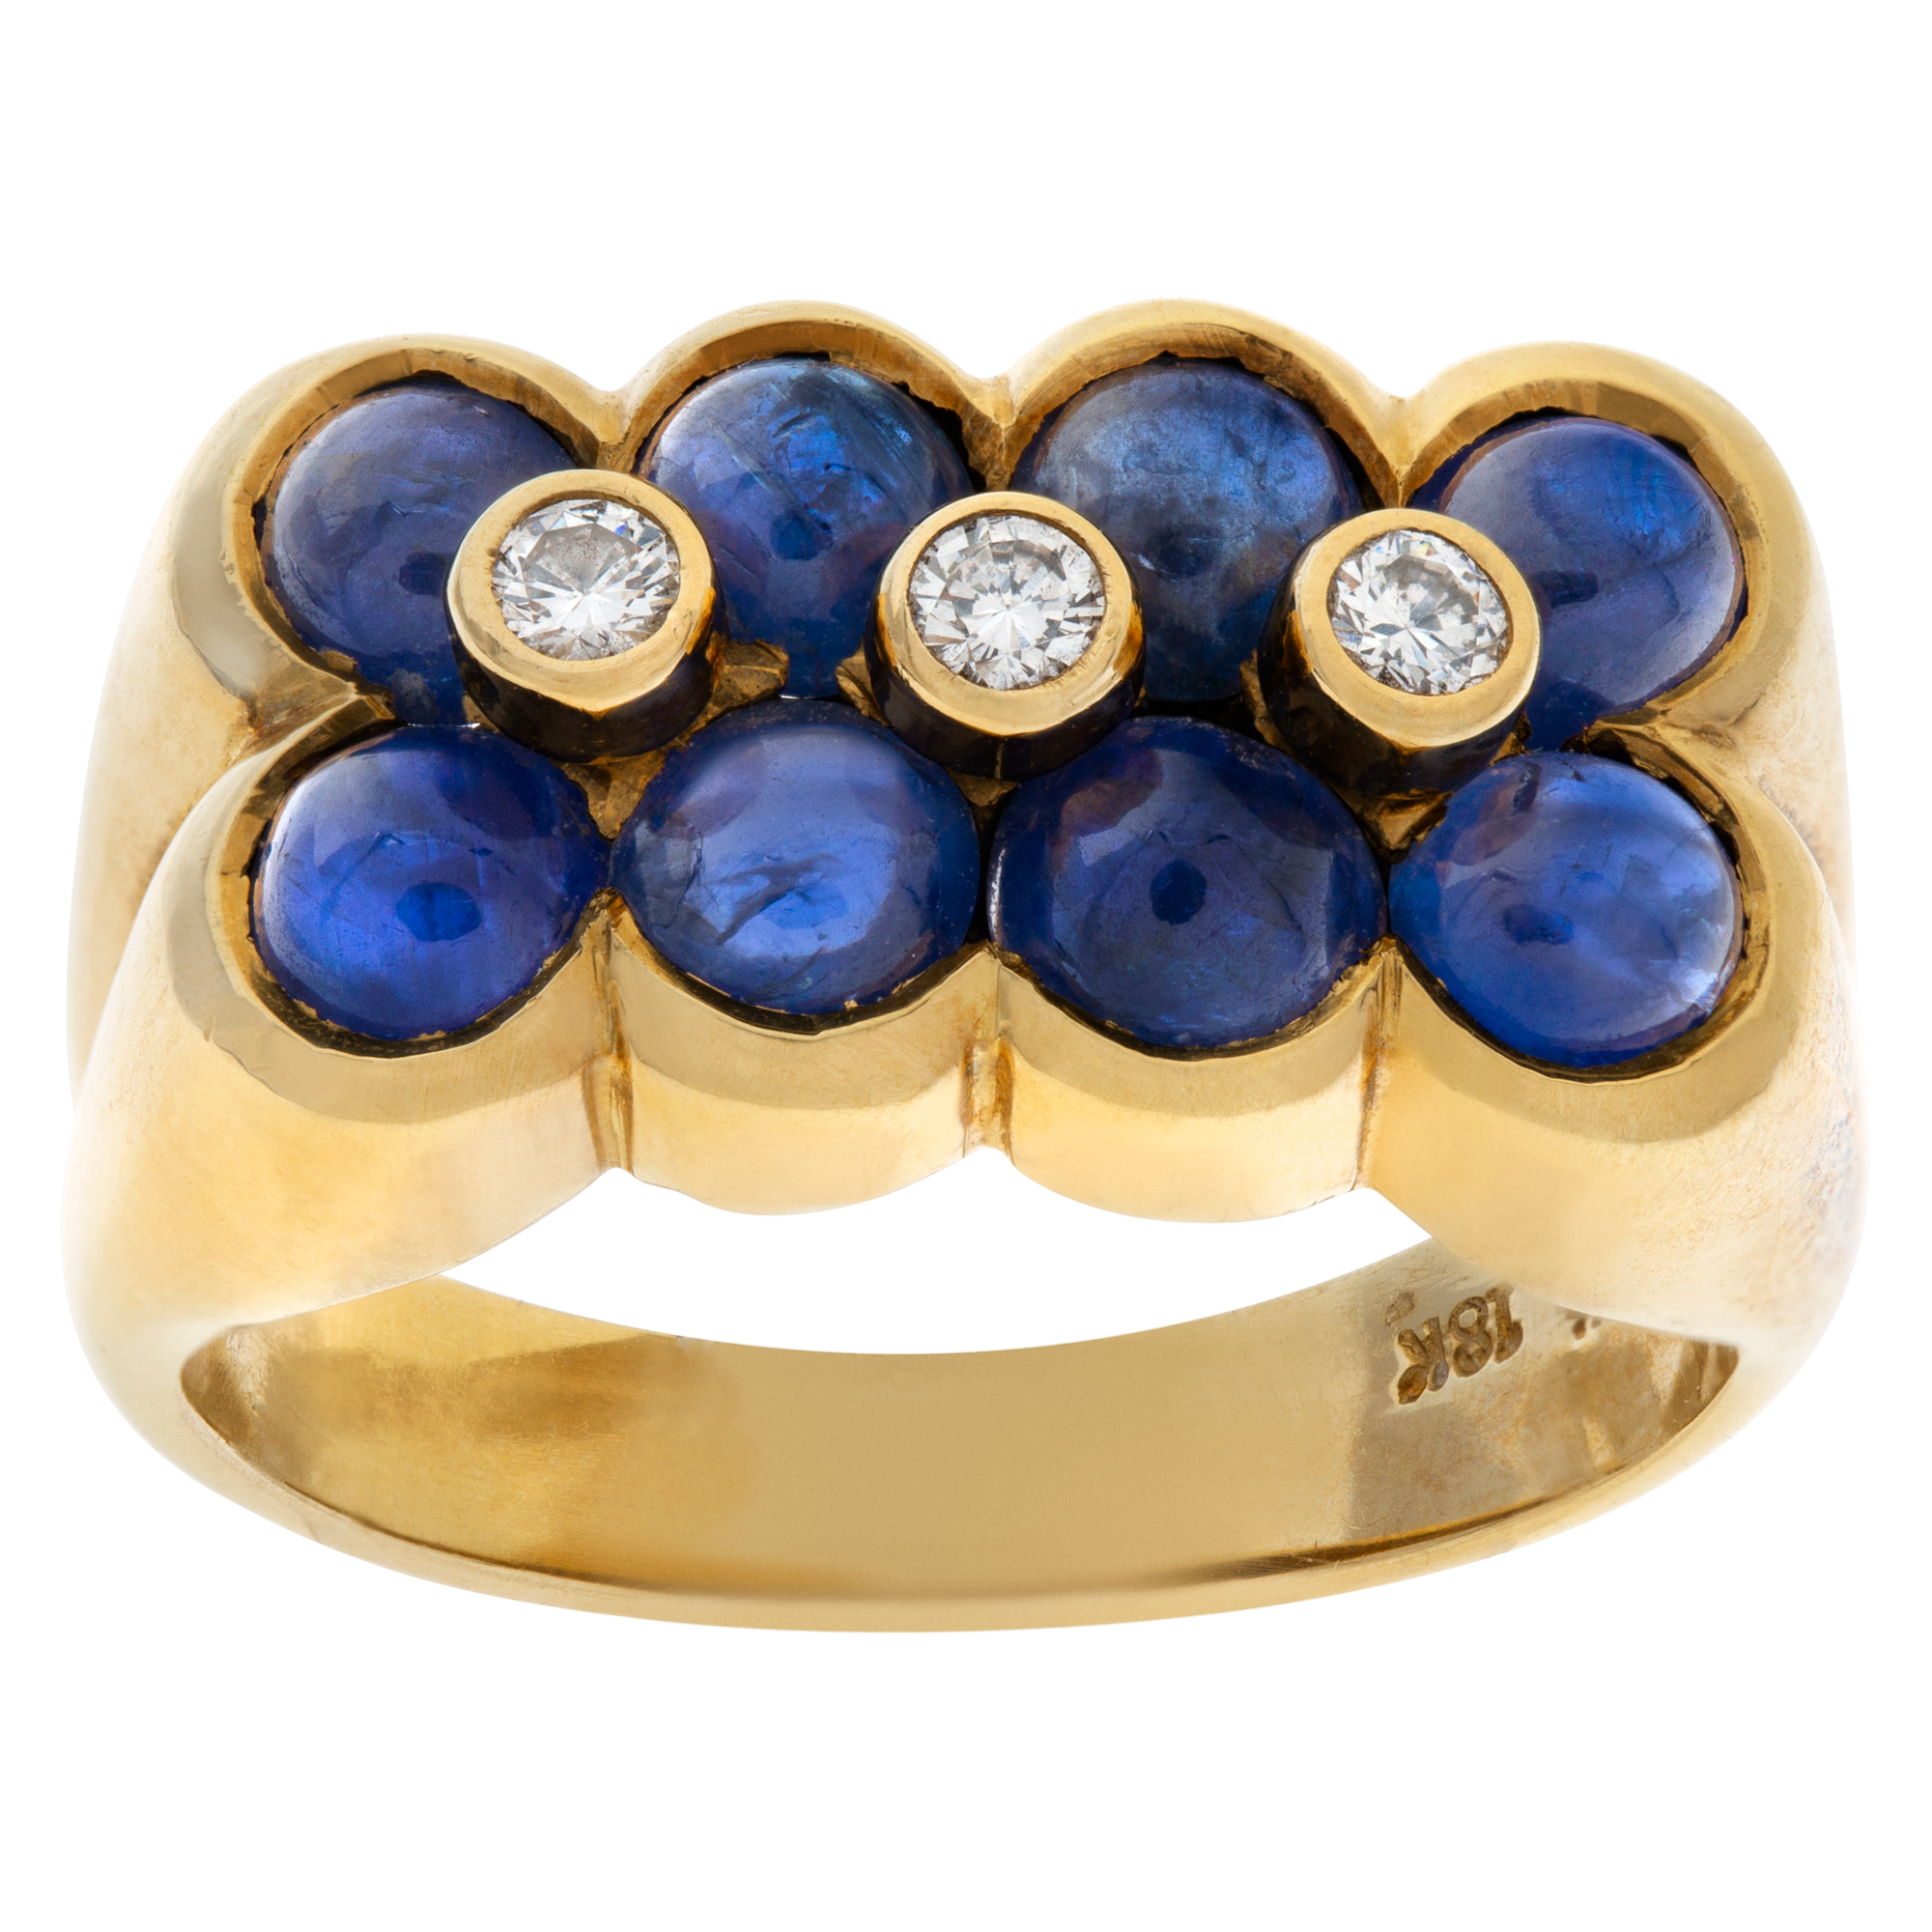 Flowery design 18K yellow gold ring with 8 cabochon sapphire, 3 full cut round brlliant bezeled diamond cente